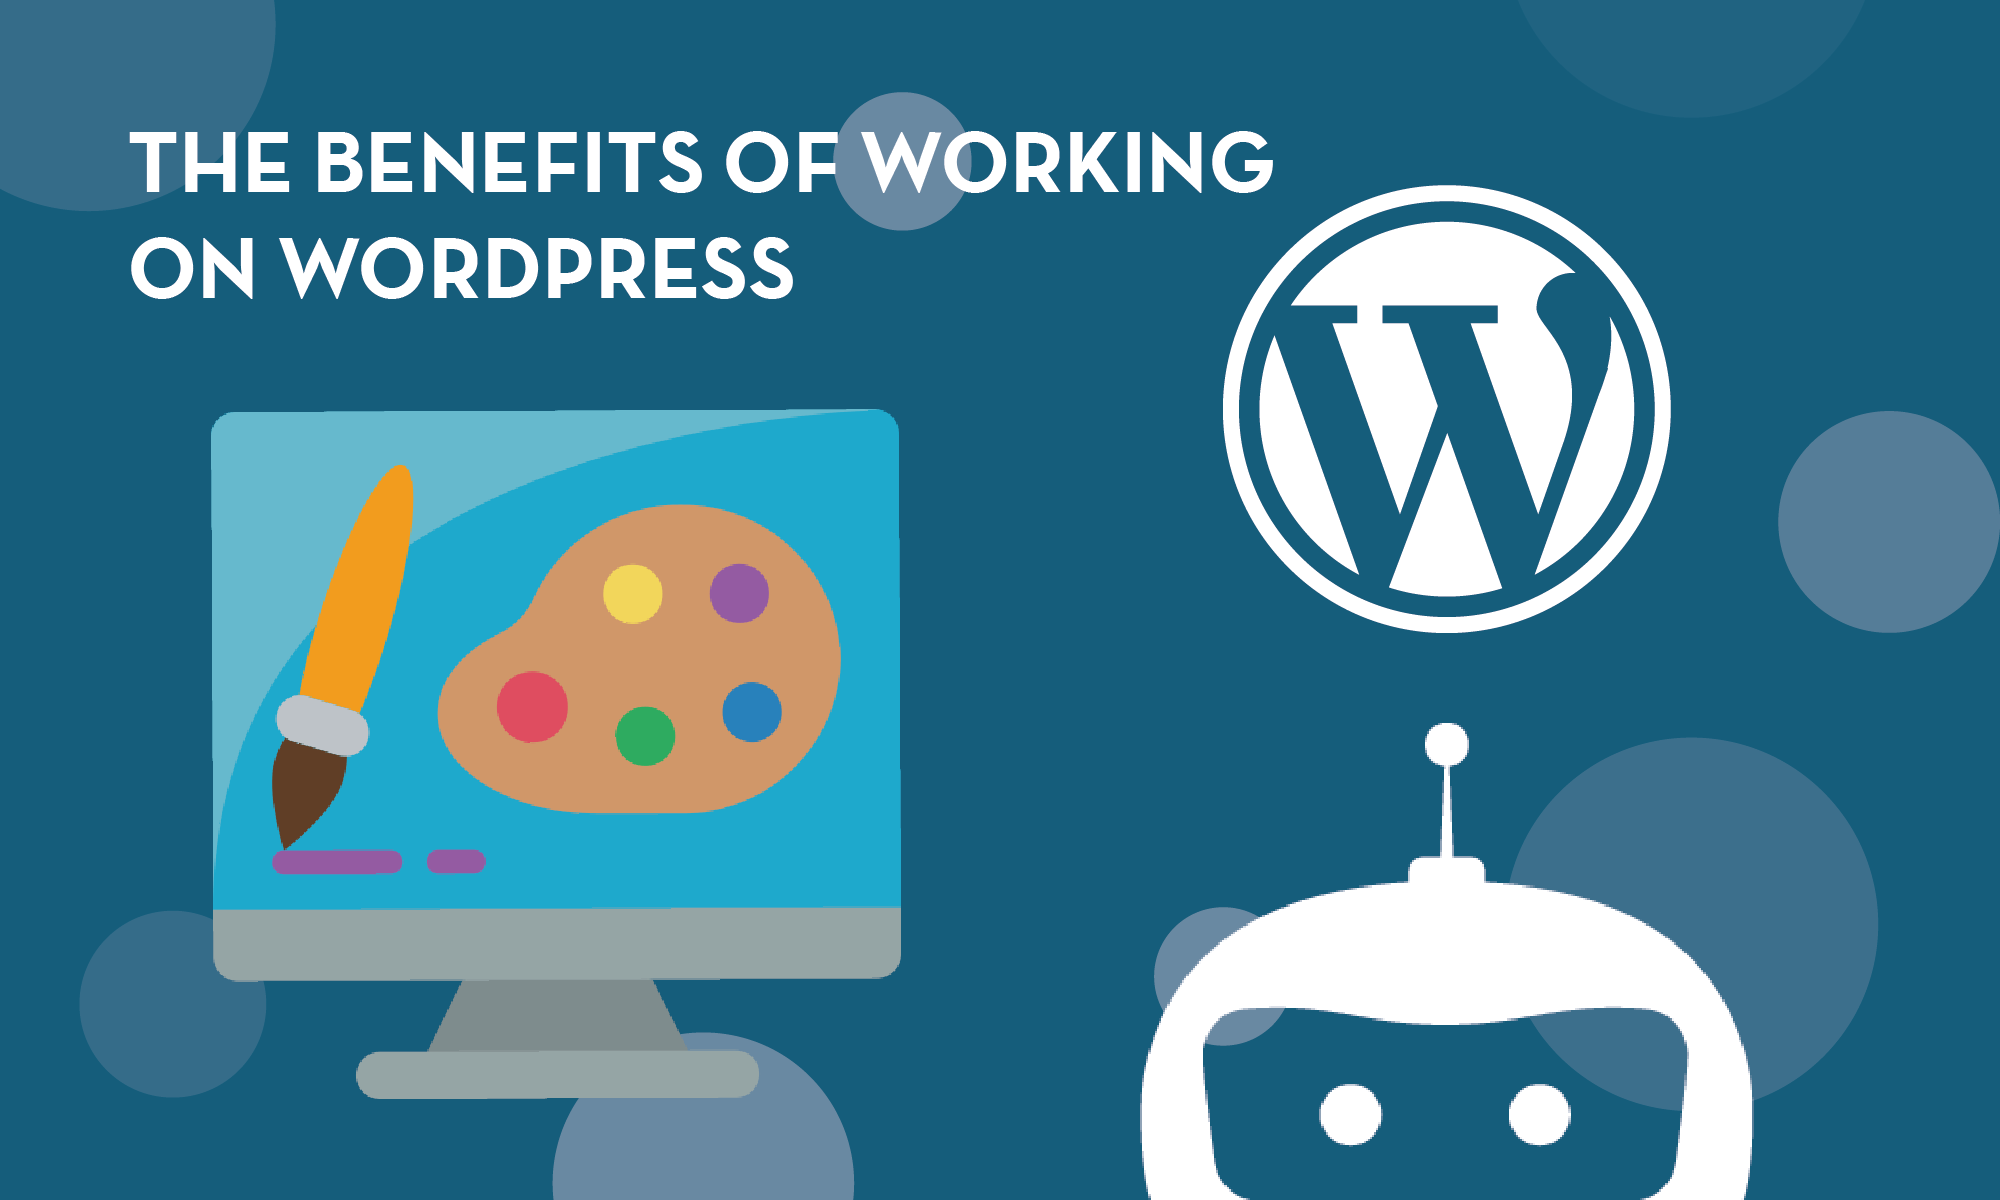 The benefits of working with WordPress